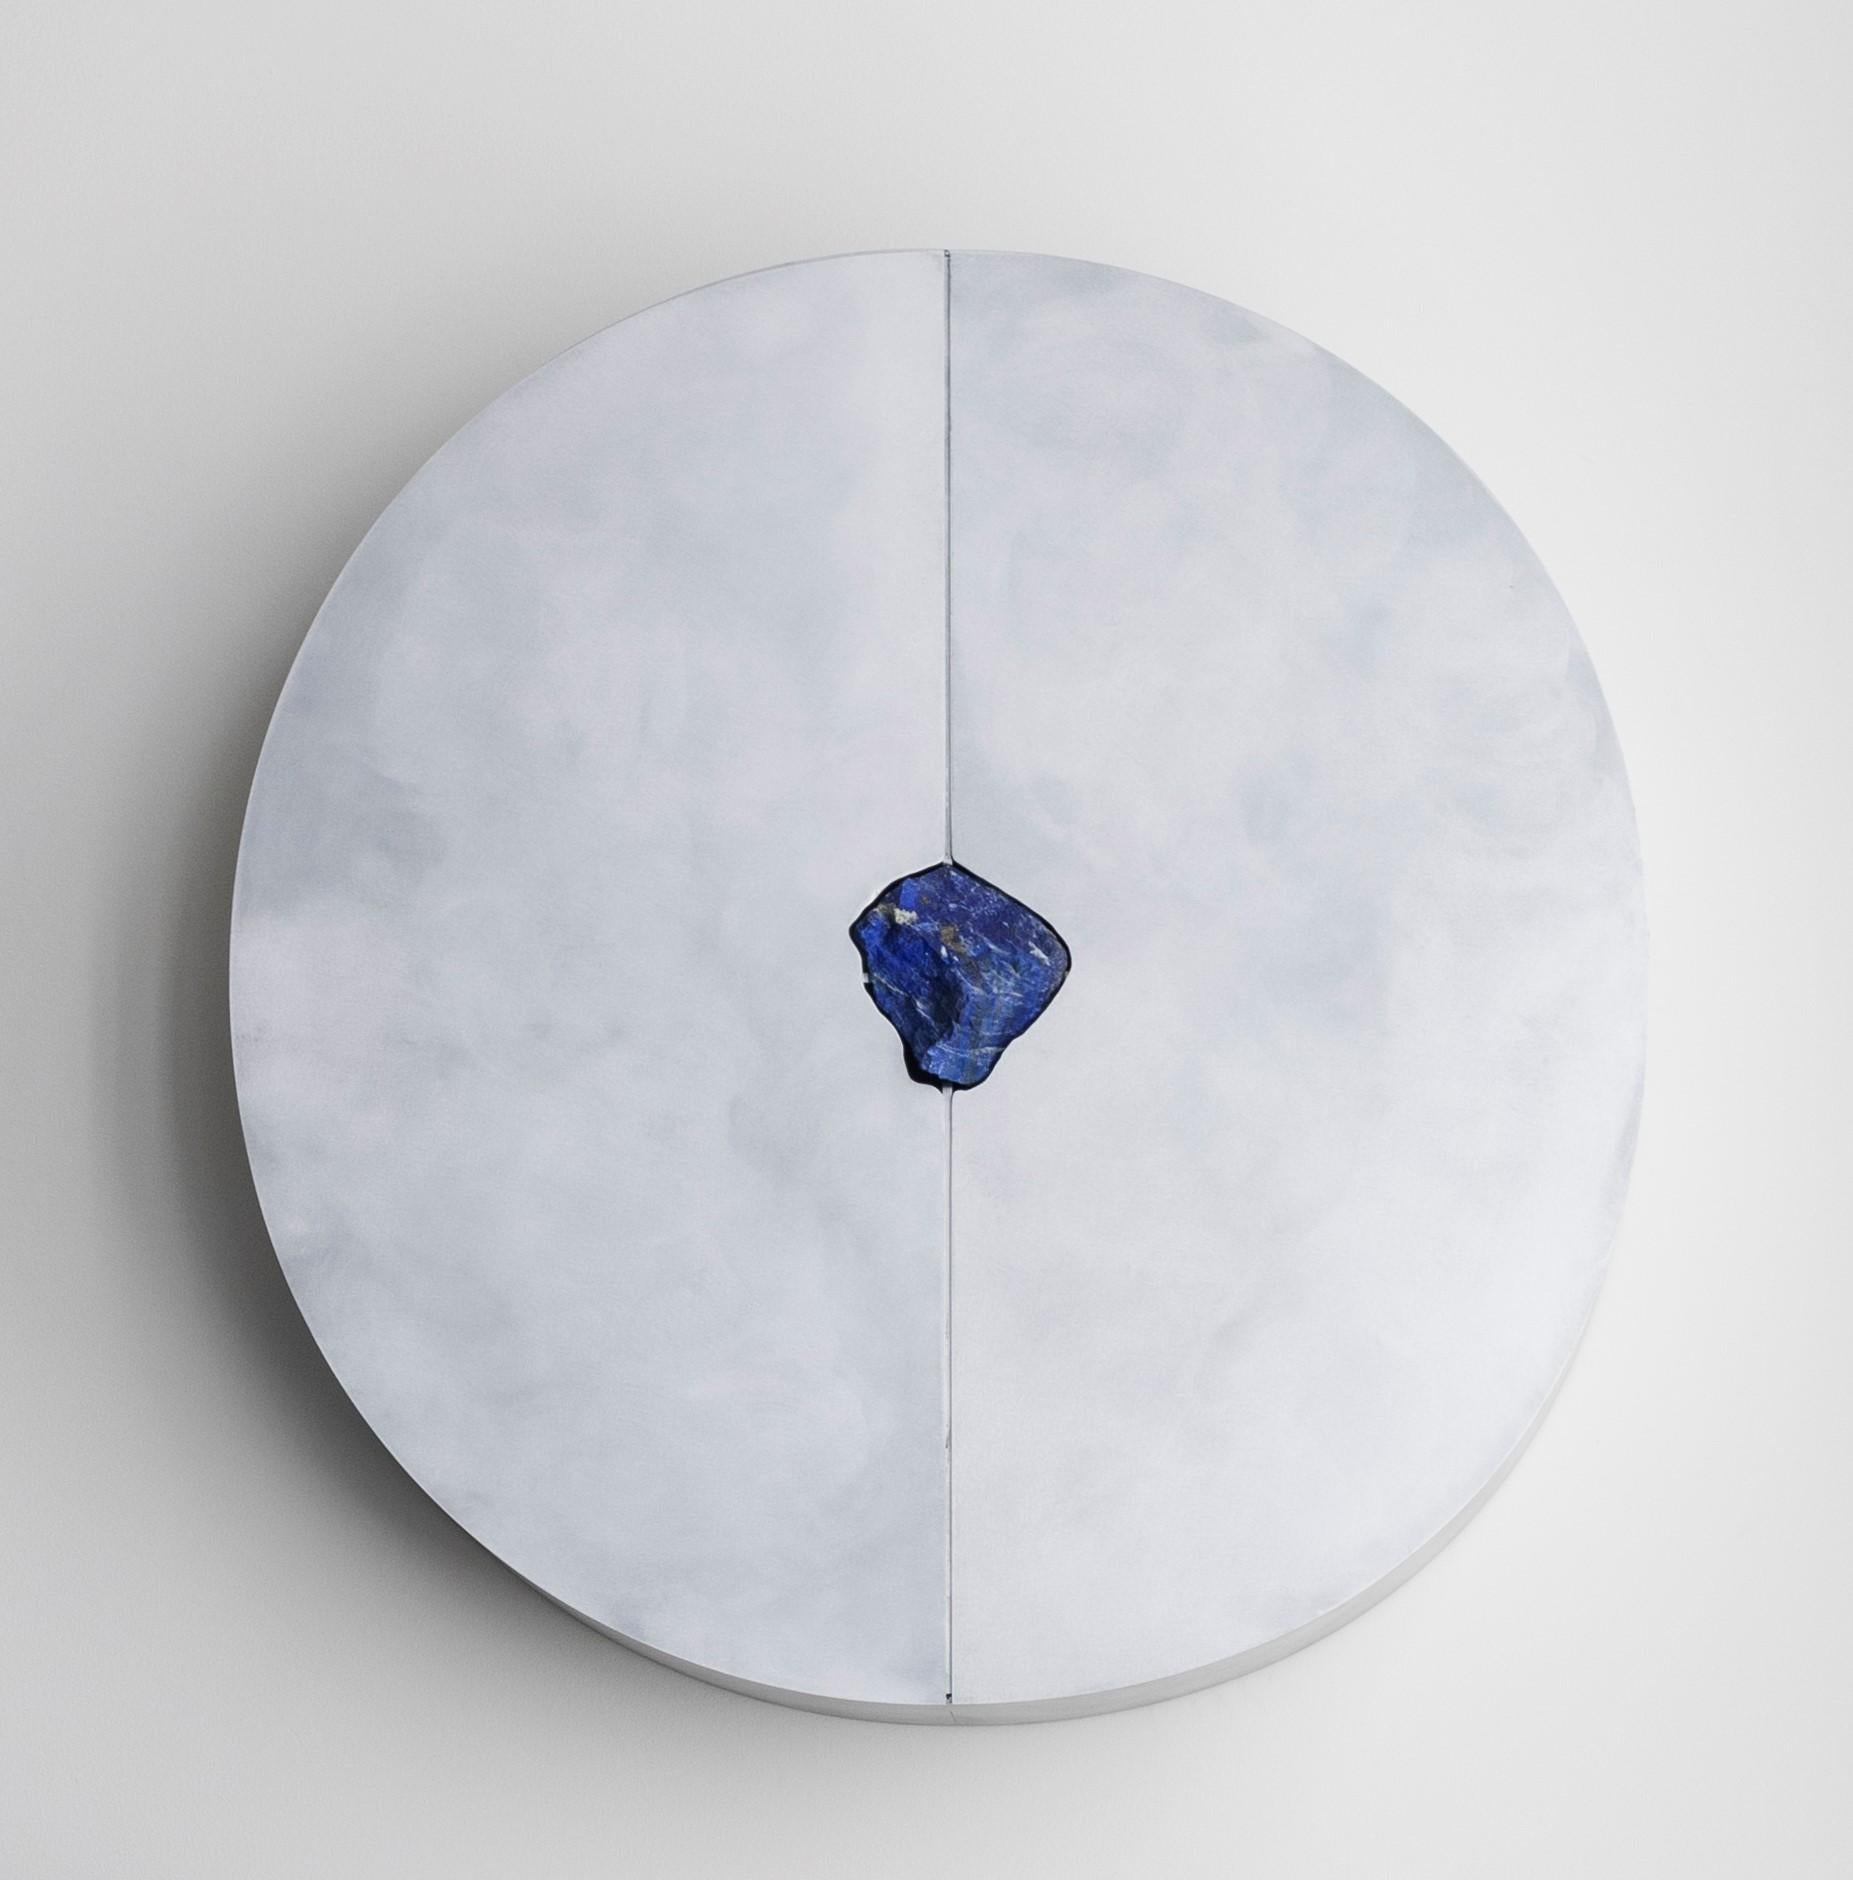 Round wall cabinet with lapis lazuli by Pierre De Valck.
Dimensions: W 90 x D 15 x H 90 cm.
Materials: Waxed aluminium with Lapis Lazuli.
Weight: 45 kg.
Each piece is unique.

Pierre De Valck (1991) born in Brussels, is a Ghent-based designer